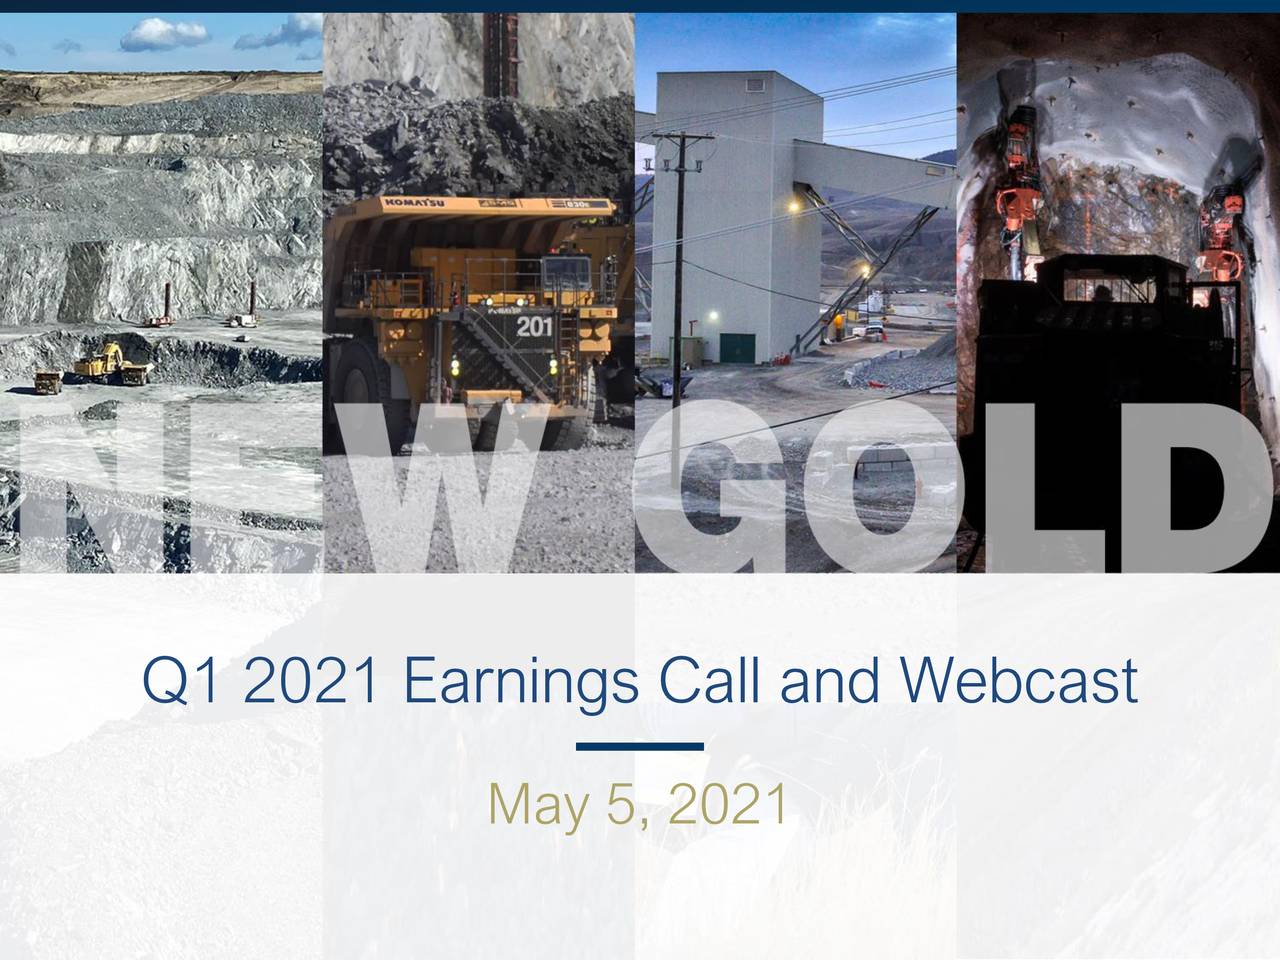 Q1 2021 Earnings Call and Webcast